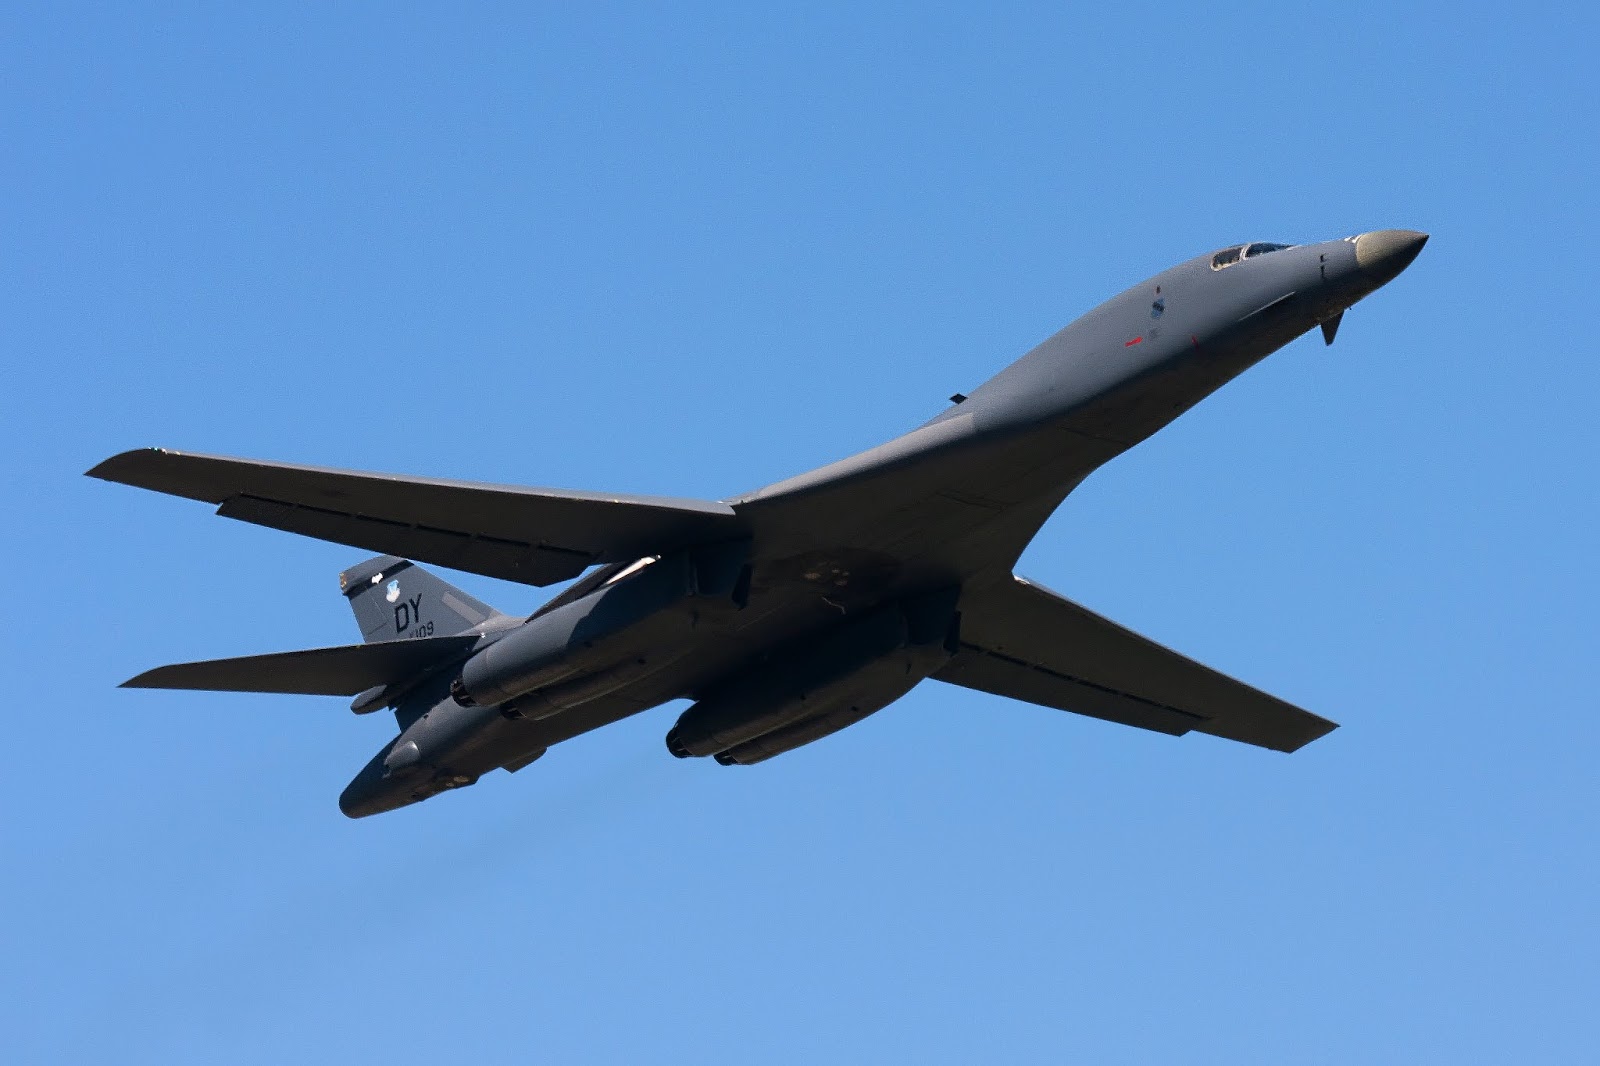 Military and Commercial Technology: USAF may retire B-1s to free funds